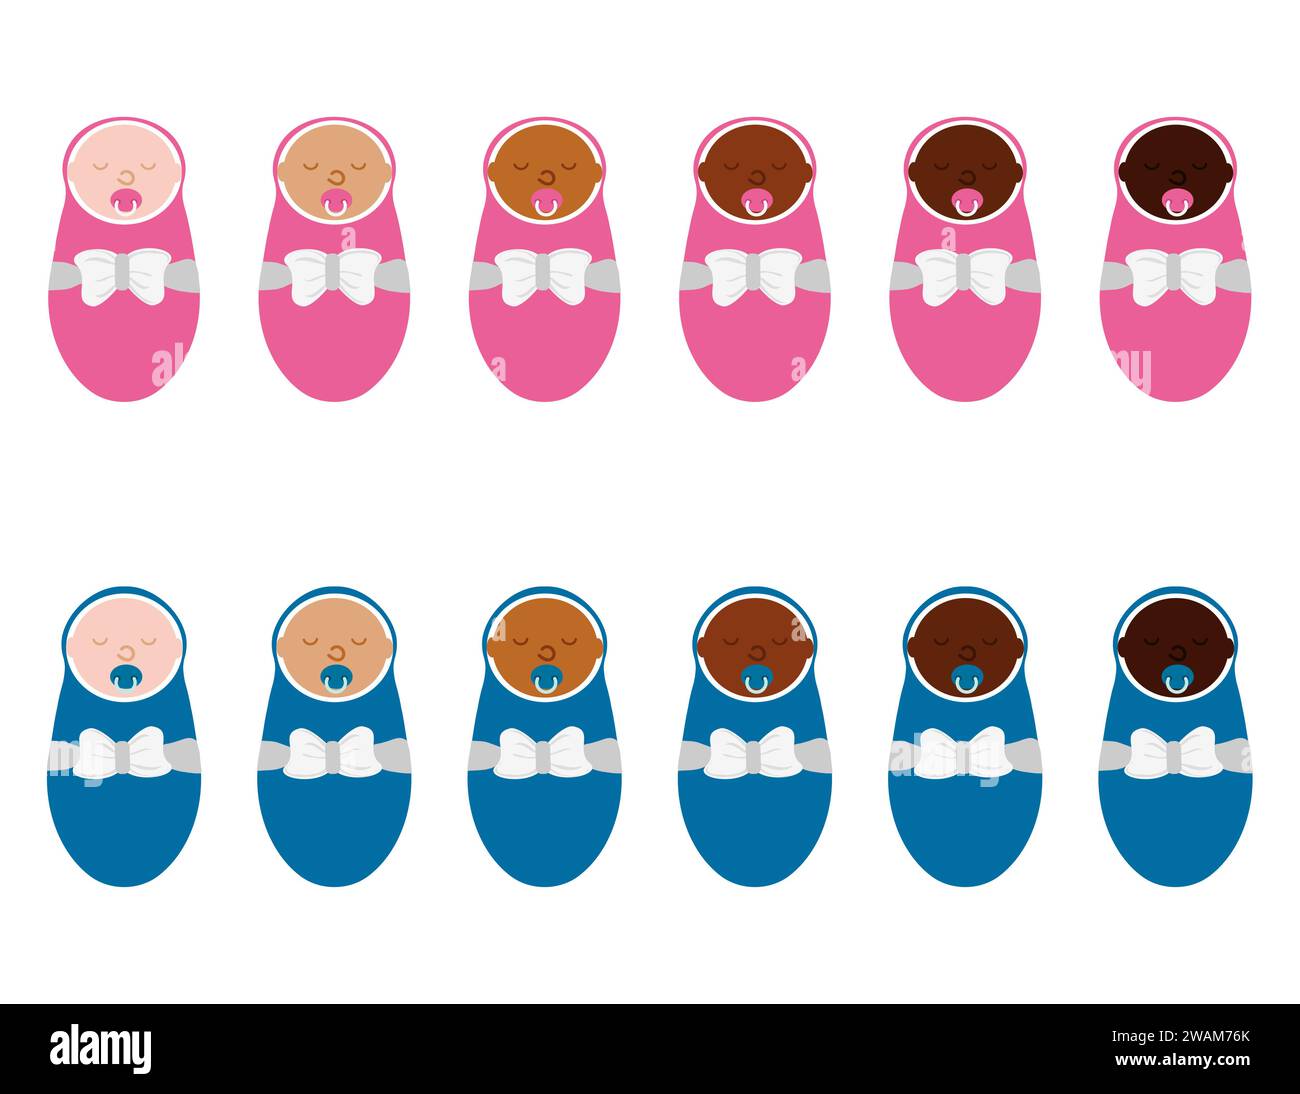 Girls and boys babies with different skin color. Young children or newborns race diversity. Multinational vector illustration. Stock Vector